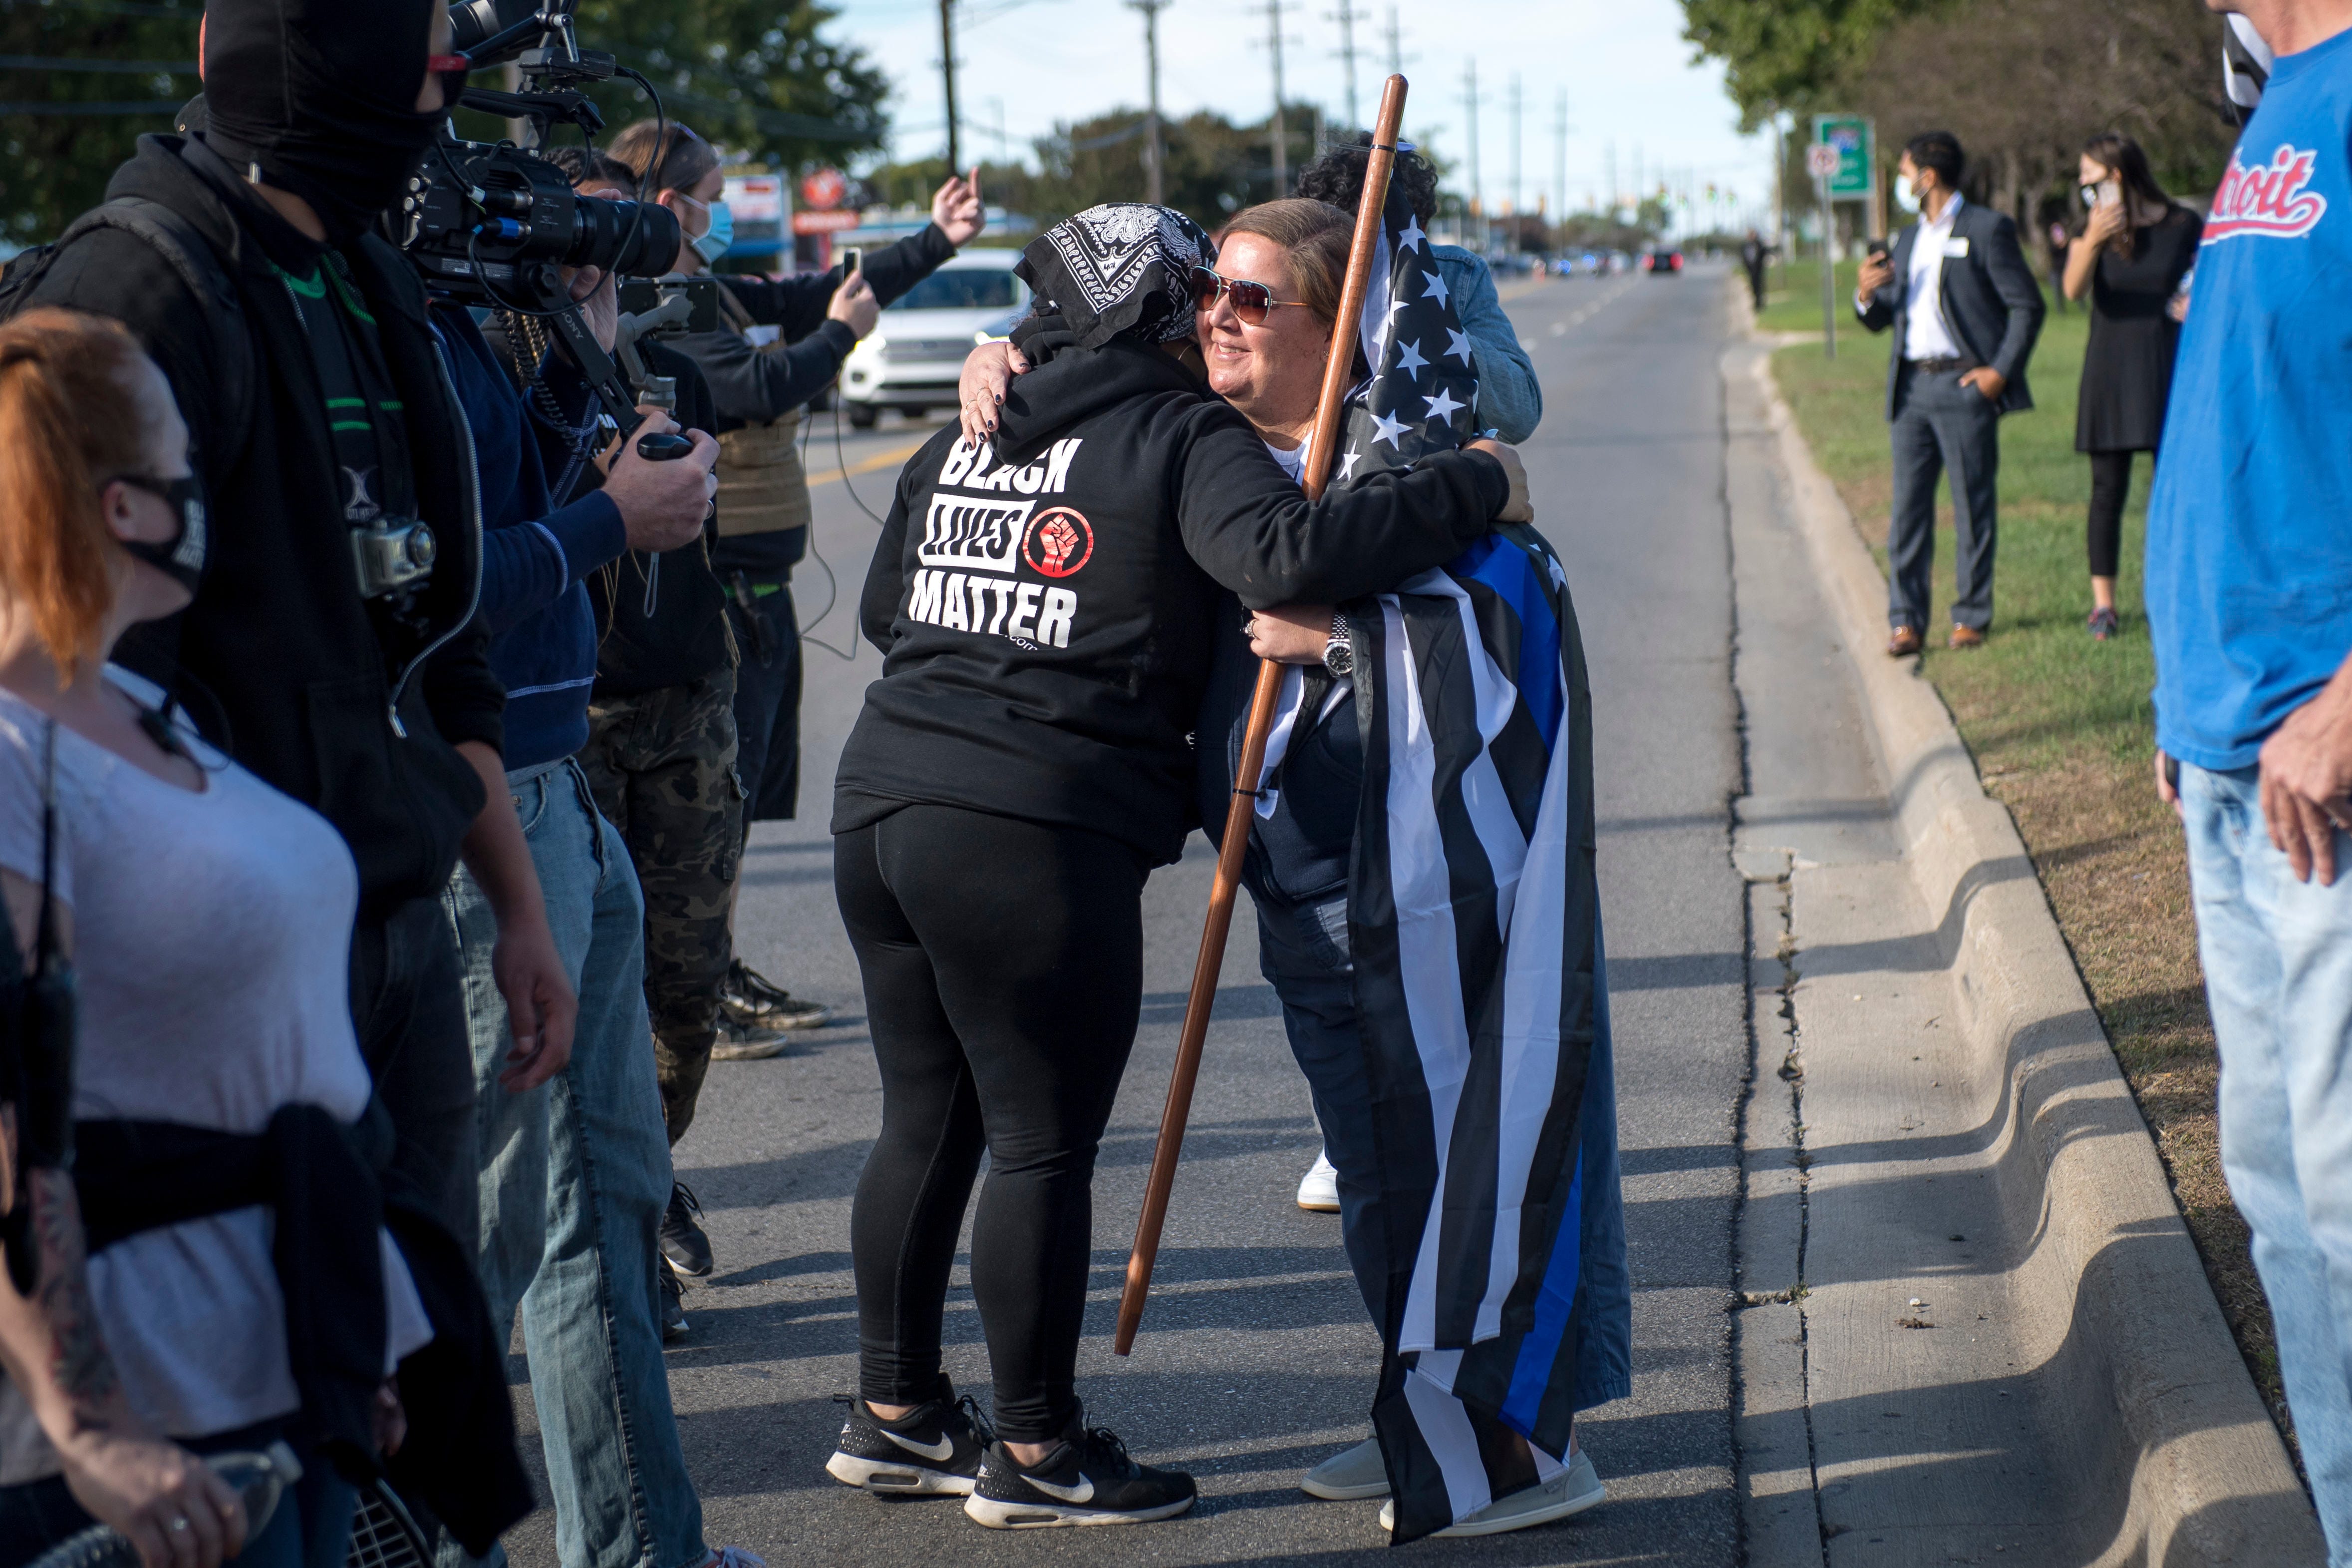 A Detroit Will Breathe protester hugs a Trump supporter before the March Against Racism in Warren on Sept. 19, 2020. The march in Warren occurred in response to the city called hate crimes against residents Candace Hall, her husband Eddie and their two children.